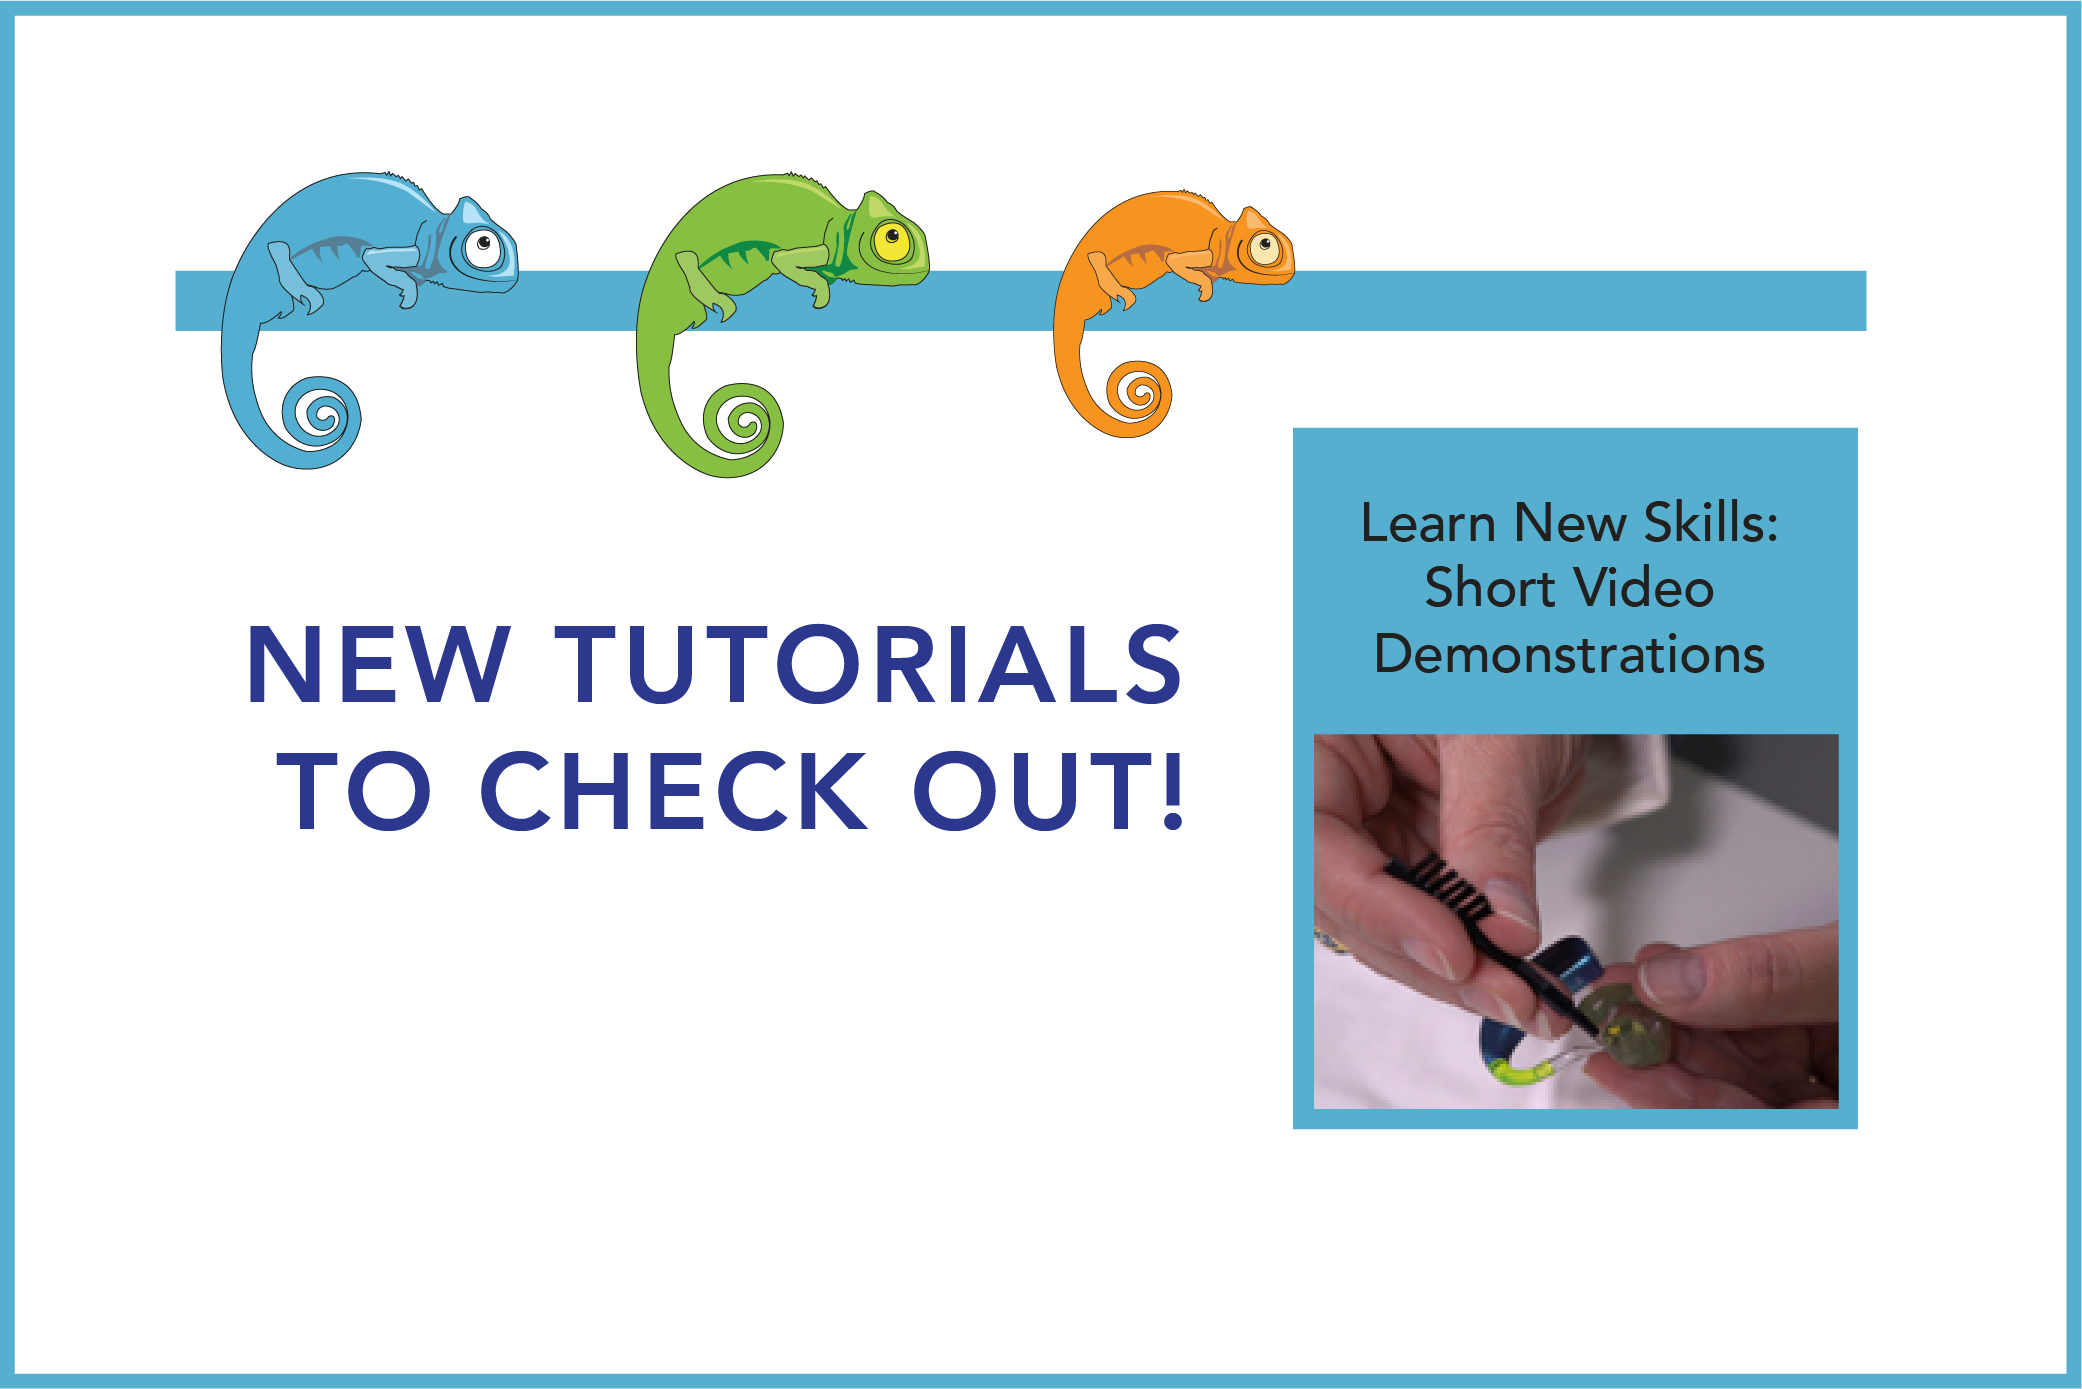 New Tutorials to Check Out! Learn New Skills: Short Video Demonstrations